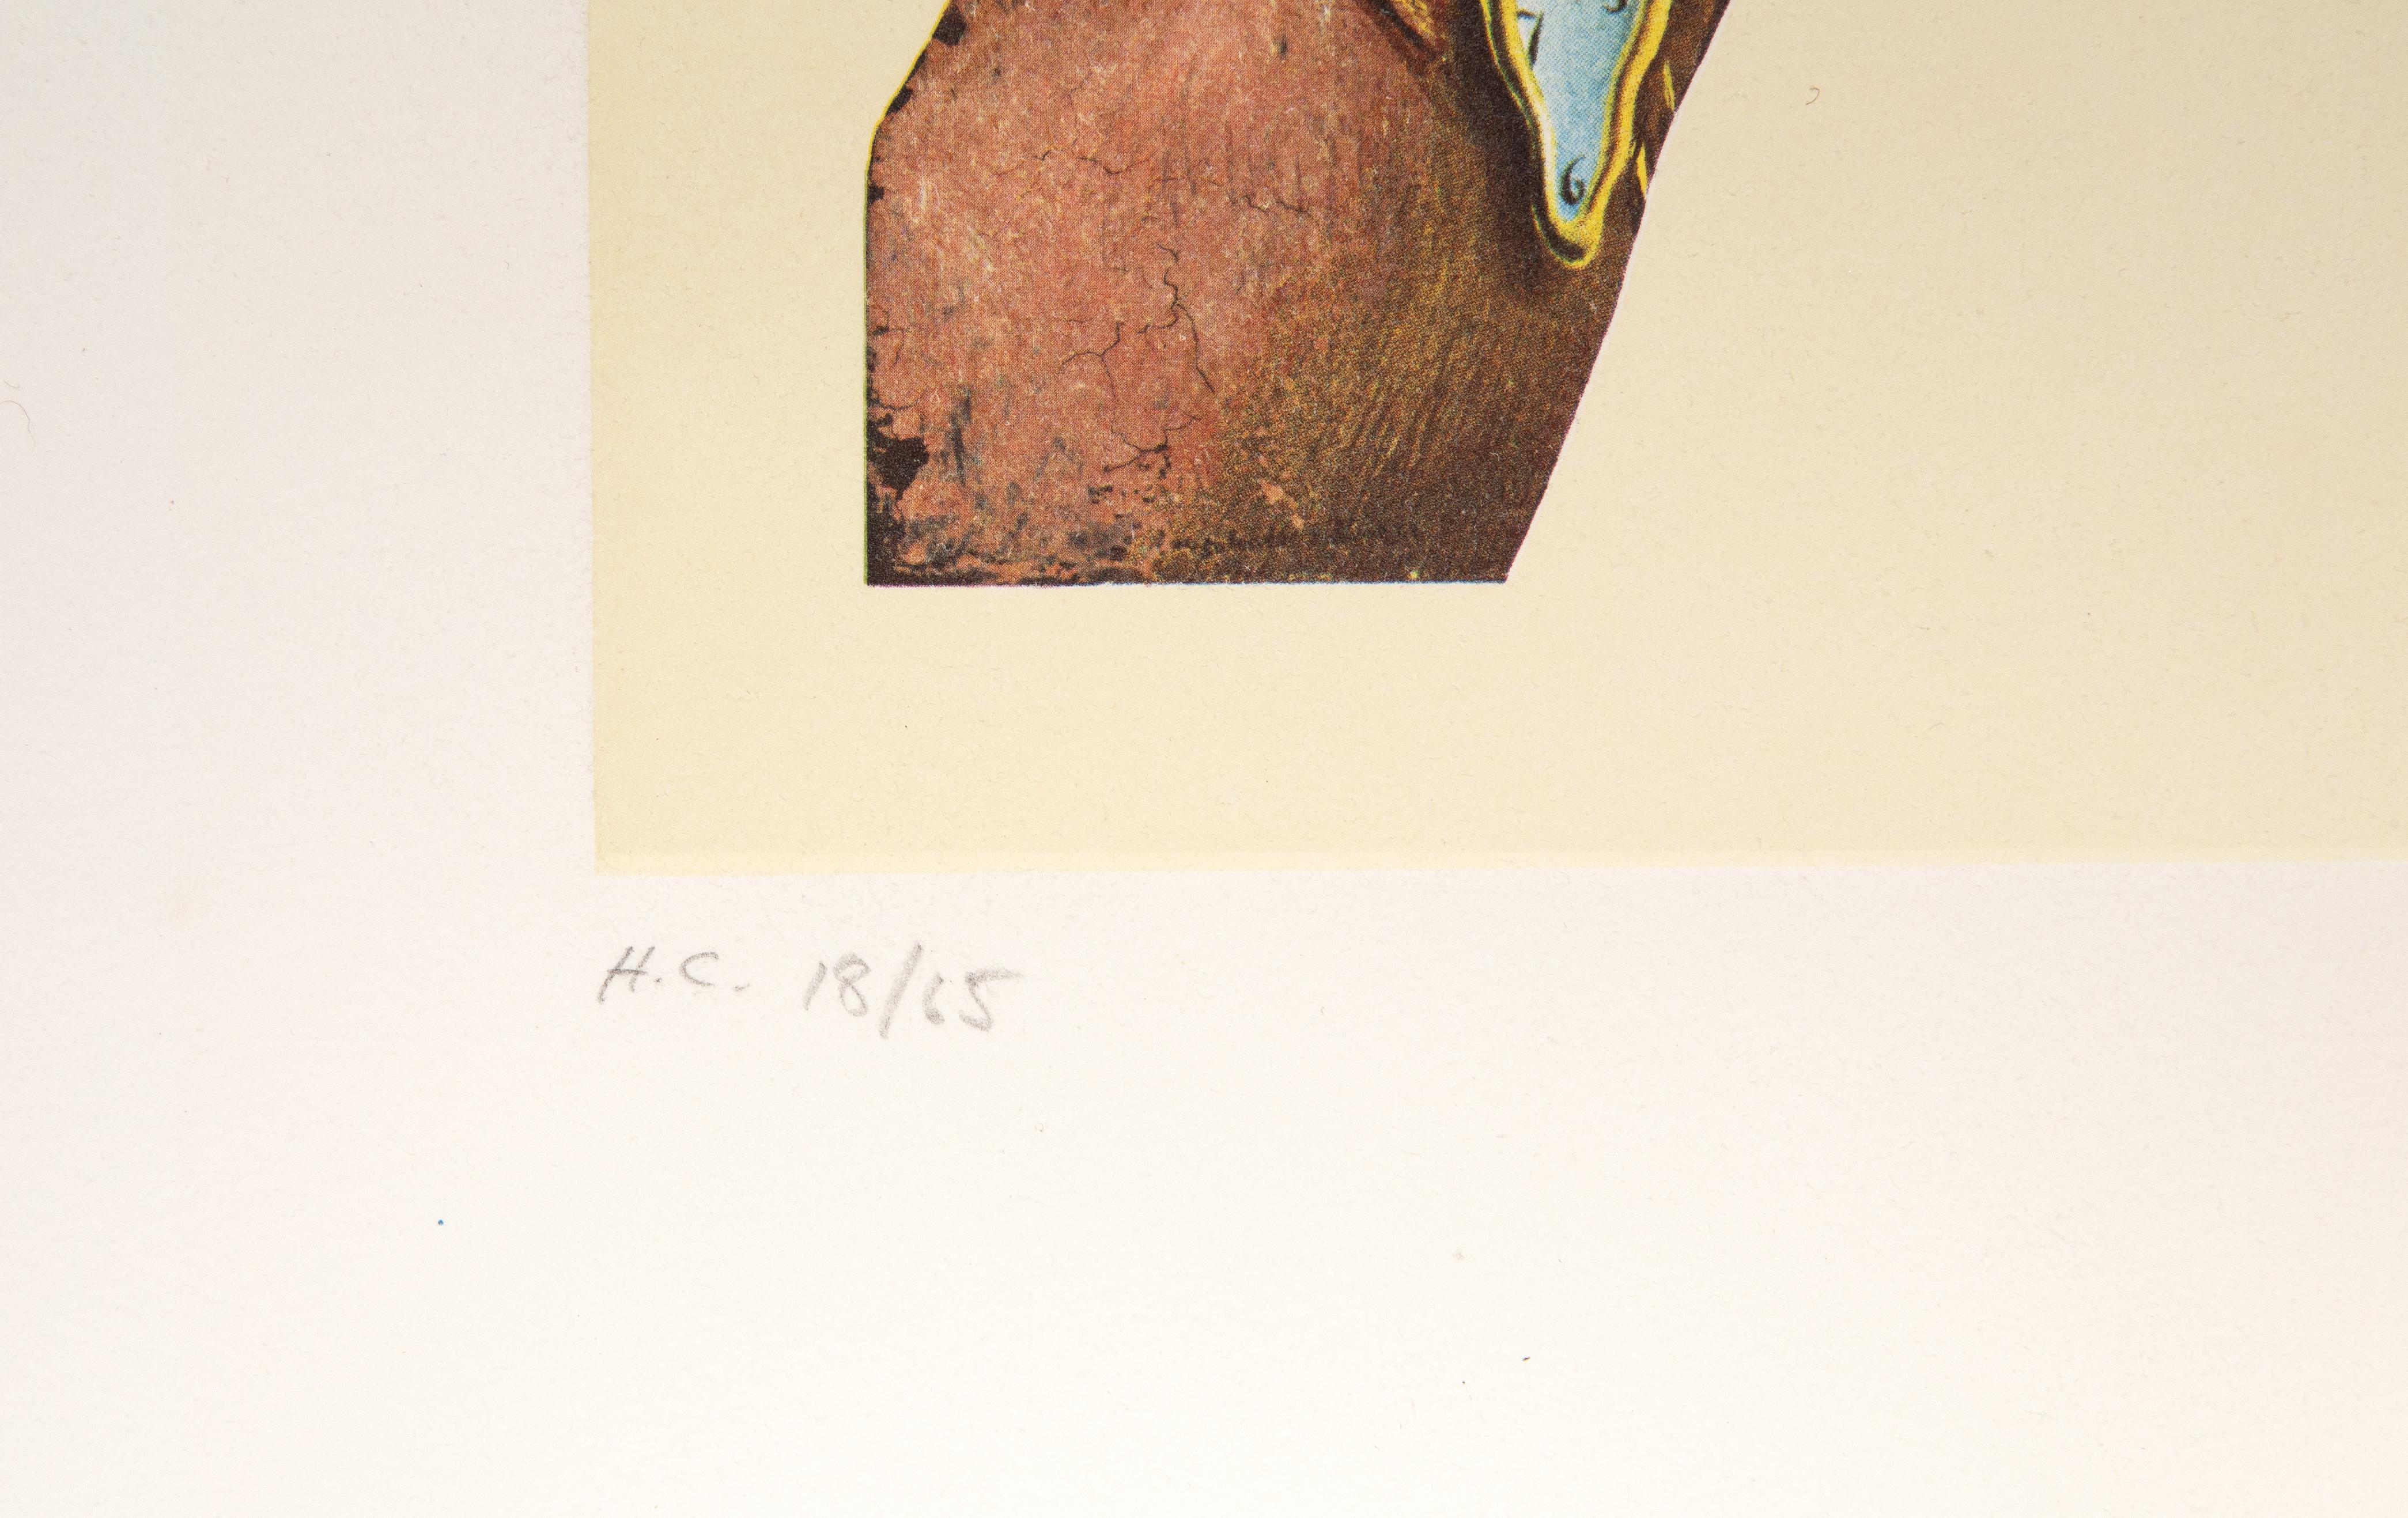 Reflection from the Cycles of Life, Lithograph and Etching by Salvador Dali - Beige Landscape Print by Salvador Dalí